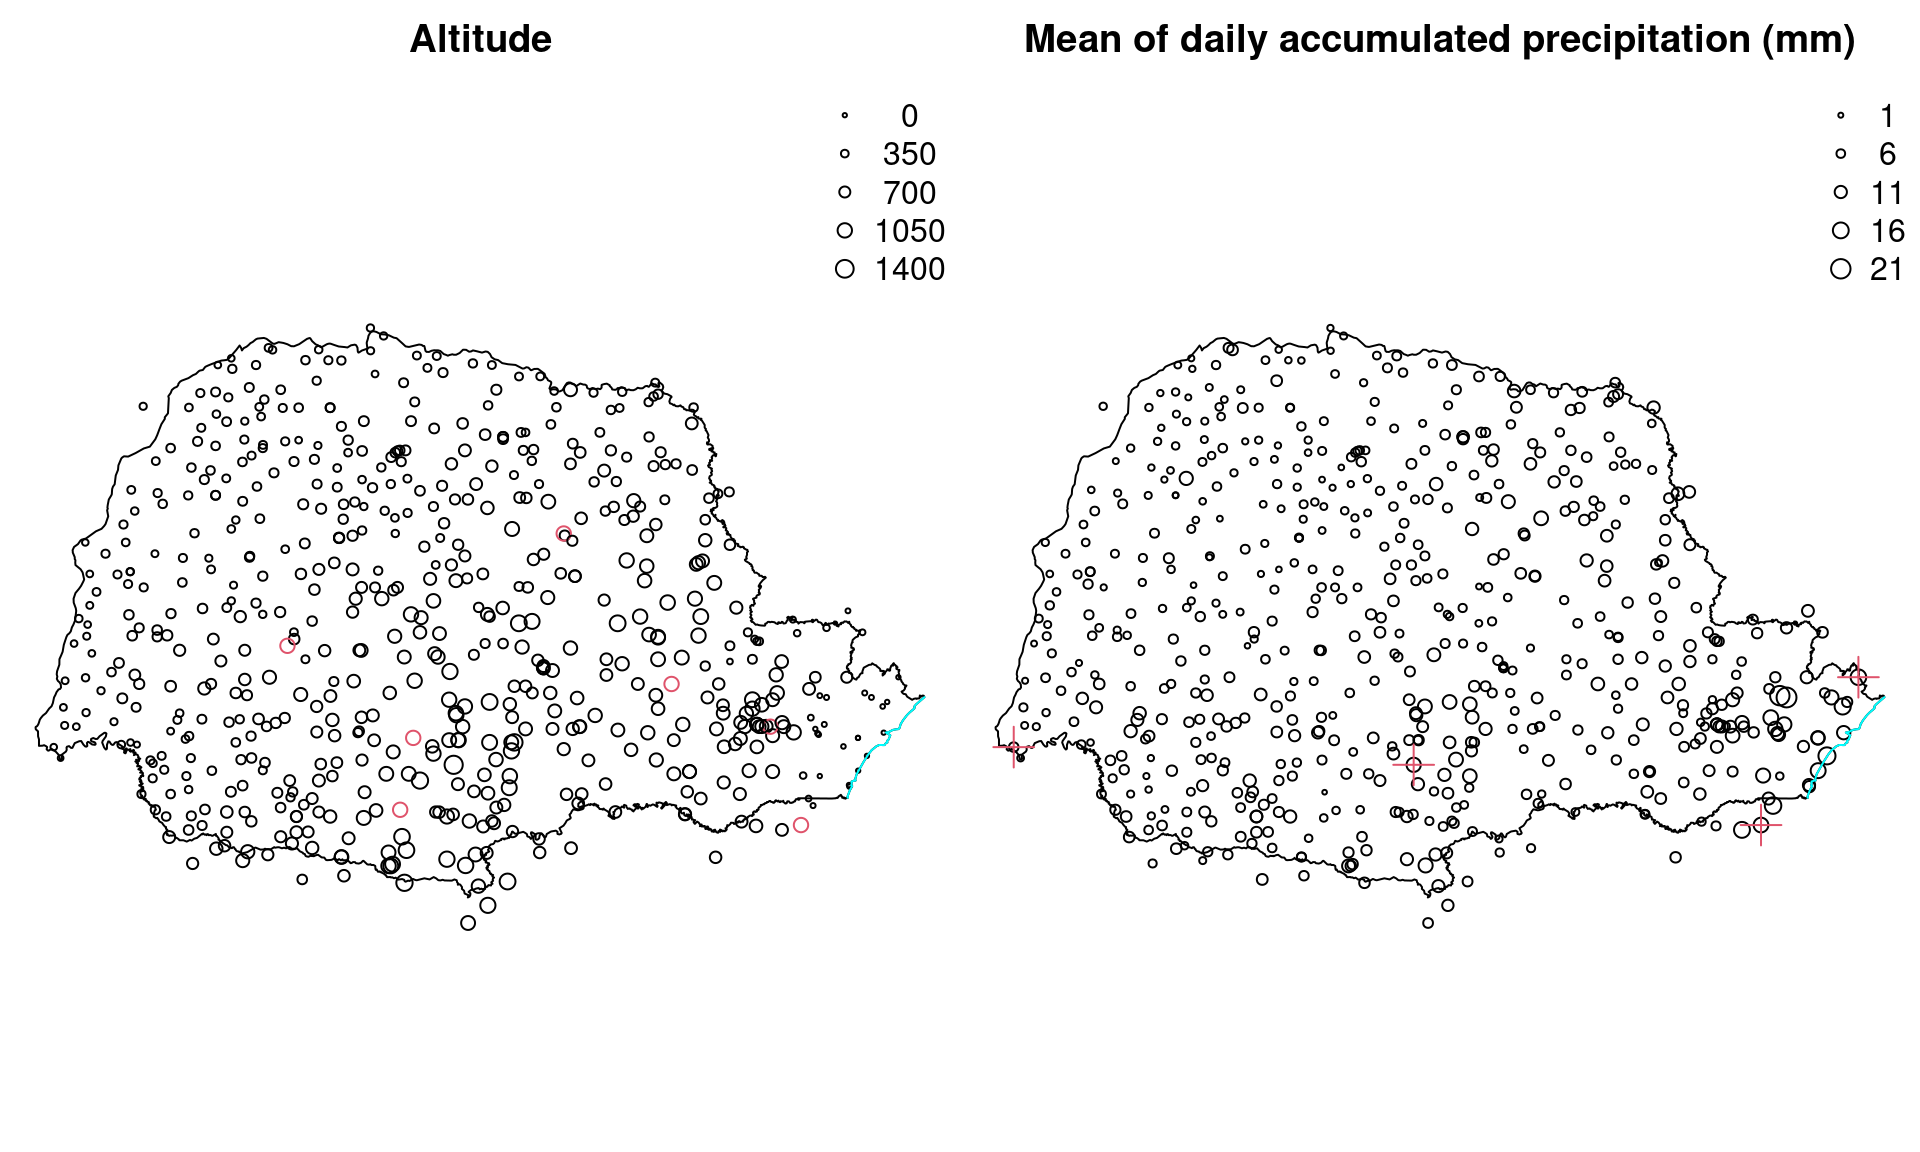 Locations of Paraná stations, altitude and average of daily accumulated precipitation (mm) in January 2011. Circles in red denote stations with missing observations and red crossess denote the four stations shown in the example in the main text.